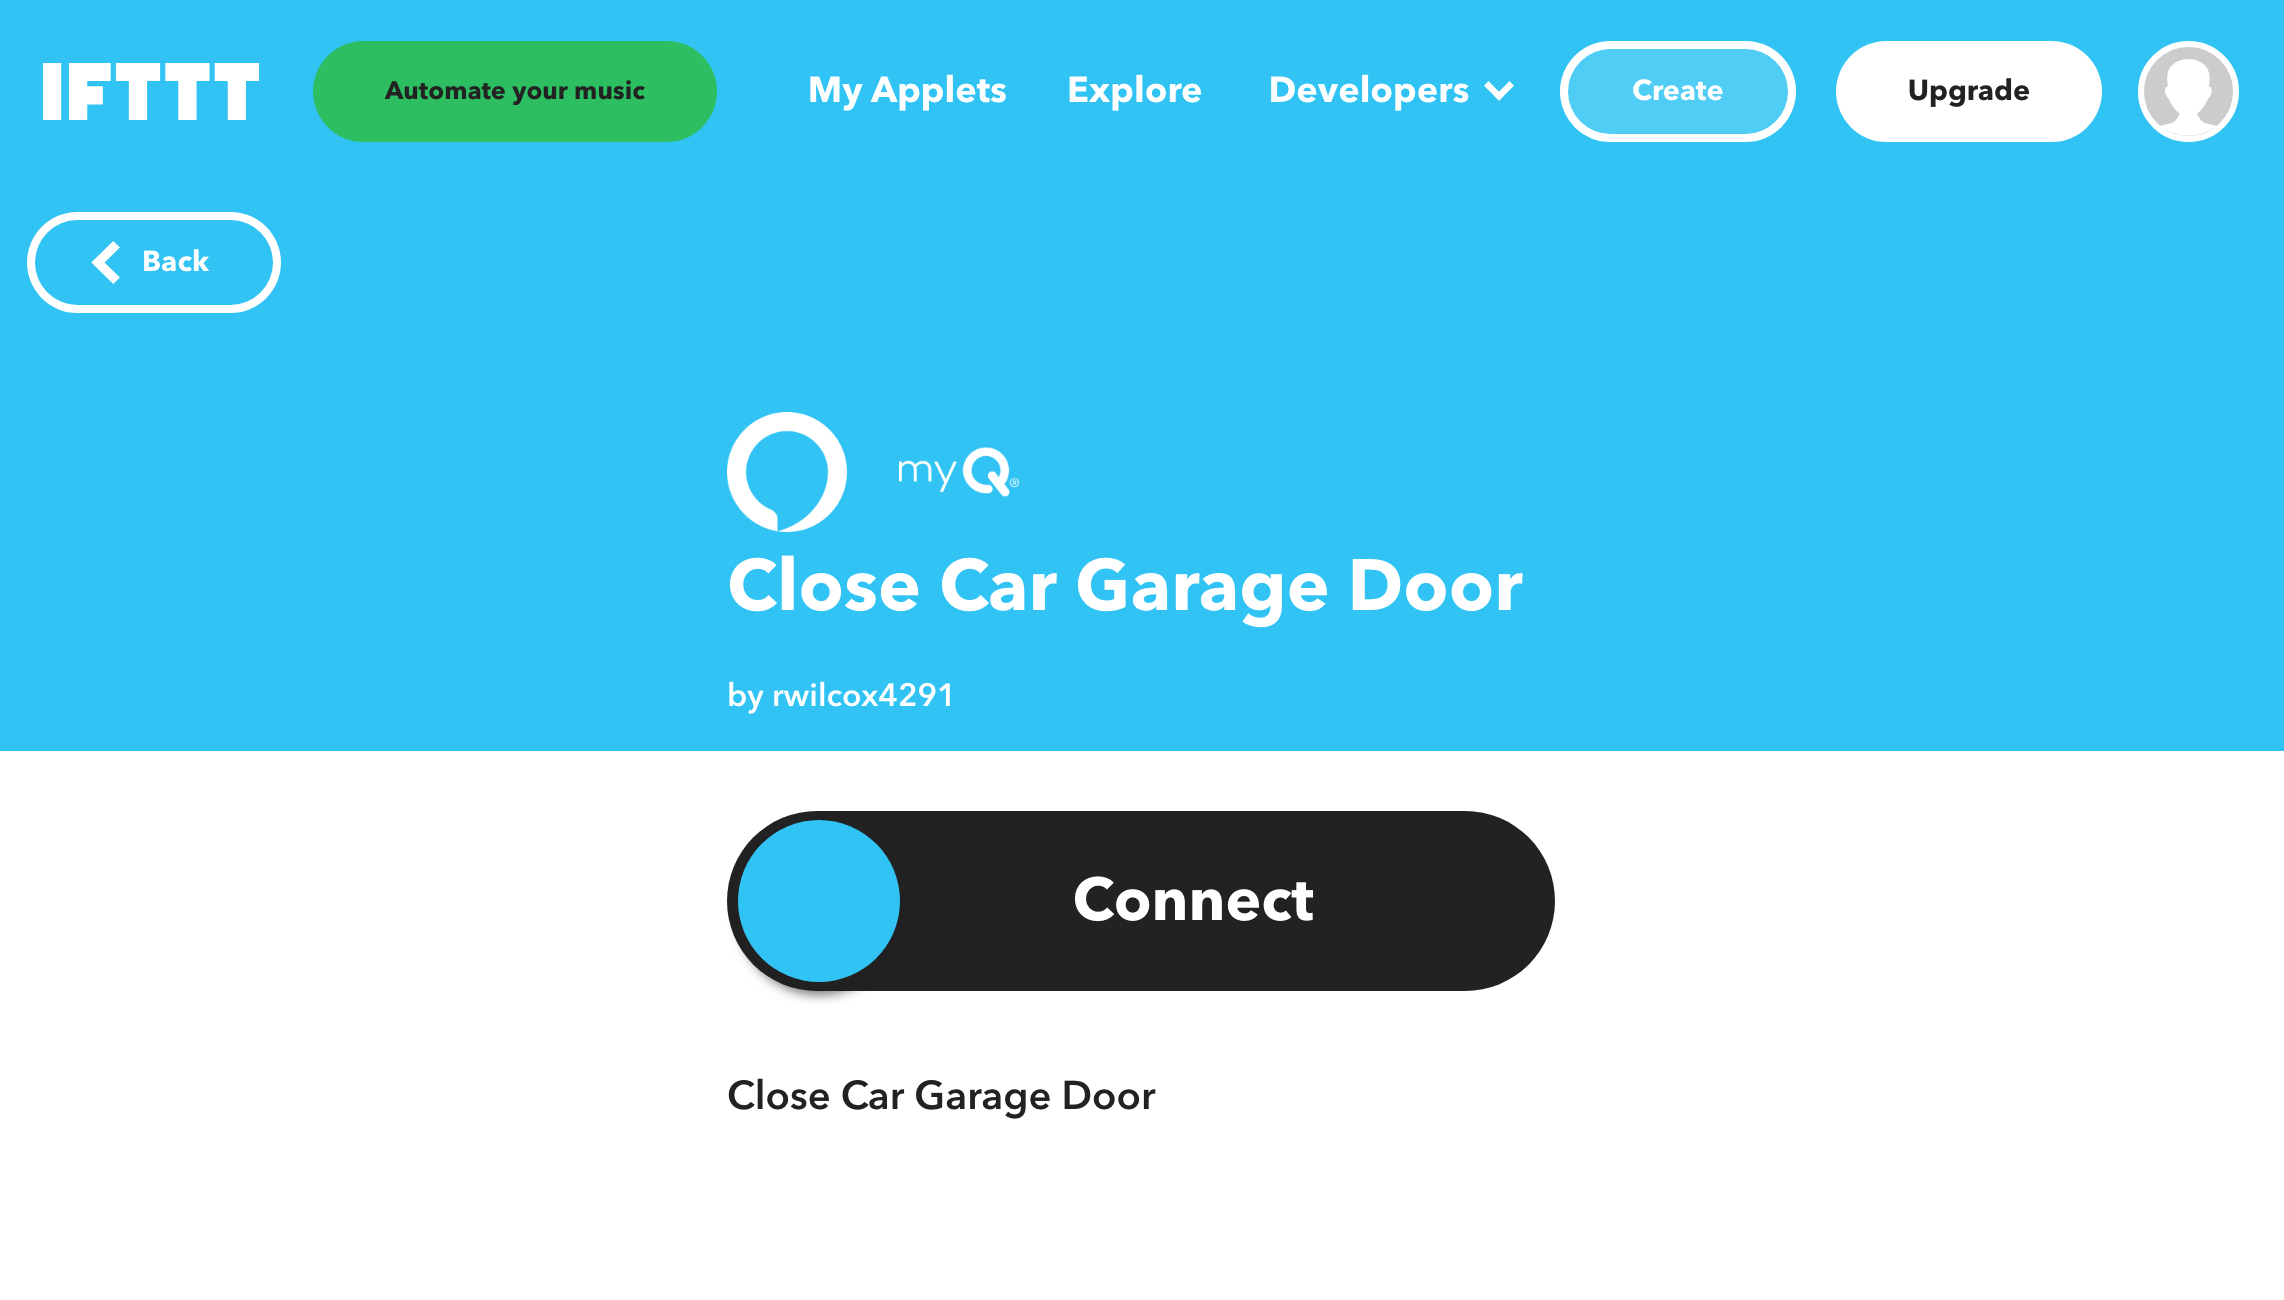 How do I connect my garage to Alexa?